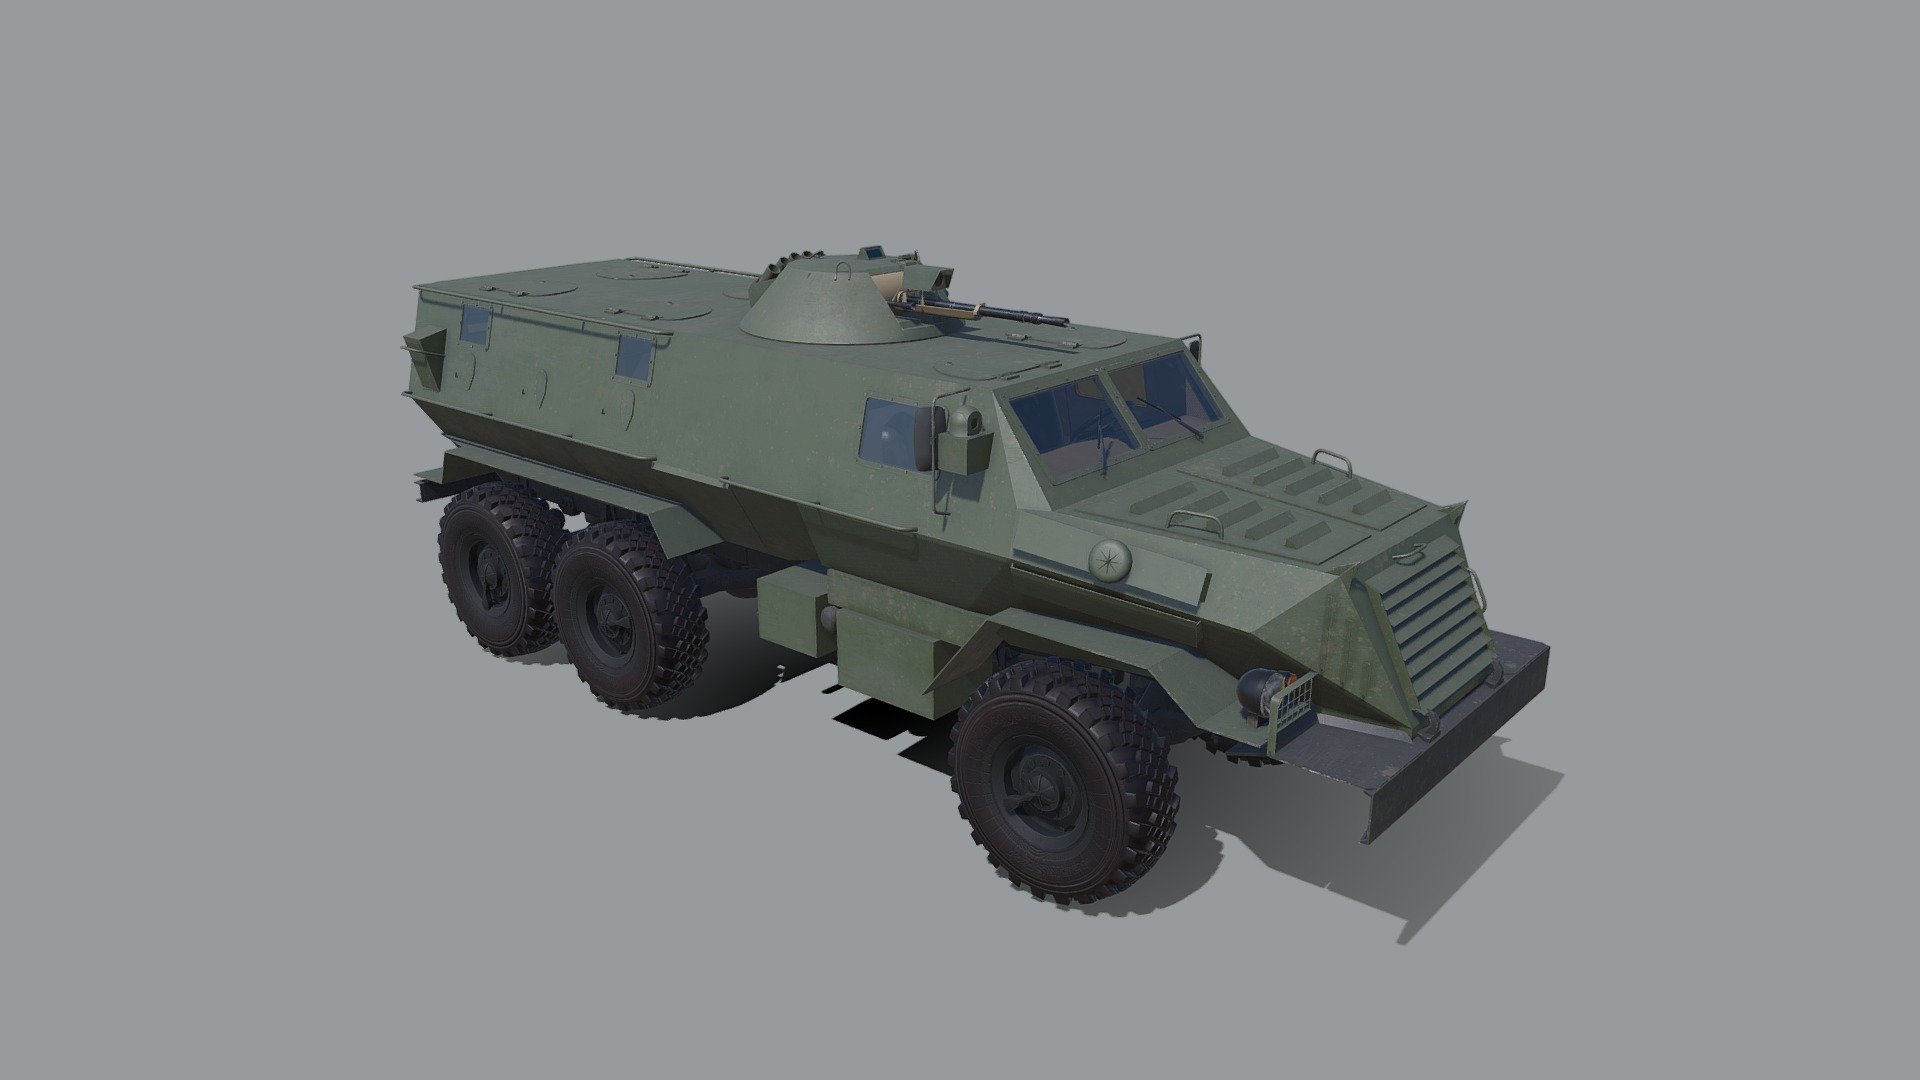 Chekan was built on the basis of the Ural 432007-0111-31 truck with a 6x6 wheel arrangement. It has anti-bullet and anti-fragmentation armor, as well as mine protection. On some specimens, you can also see a small turret with a machine gun. These armored cars were noticed during conflicts in Syria, Libya, Sudan and the Central African Republic by mercenaries of the Wagner private military company 3d model